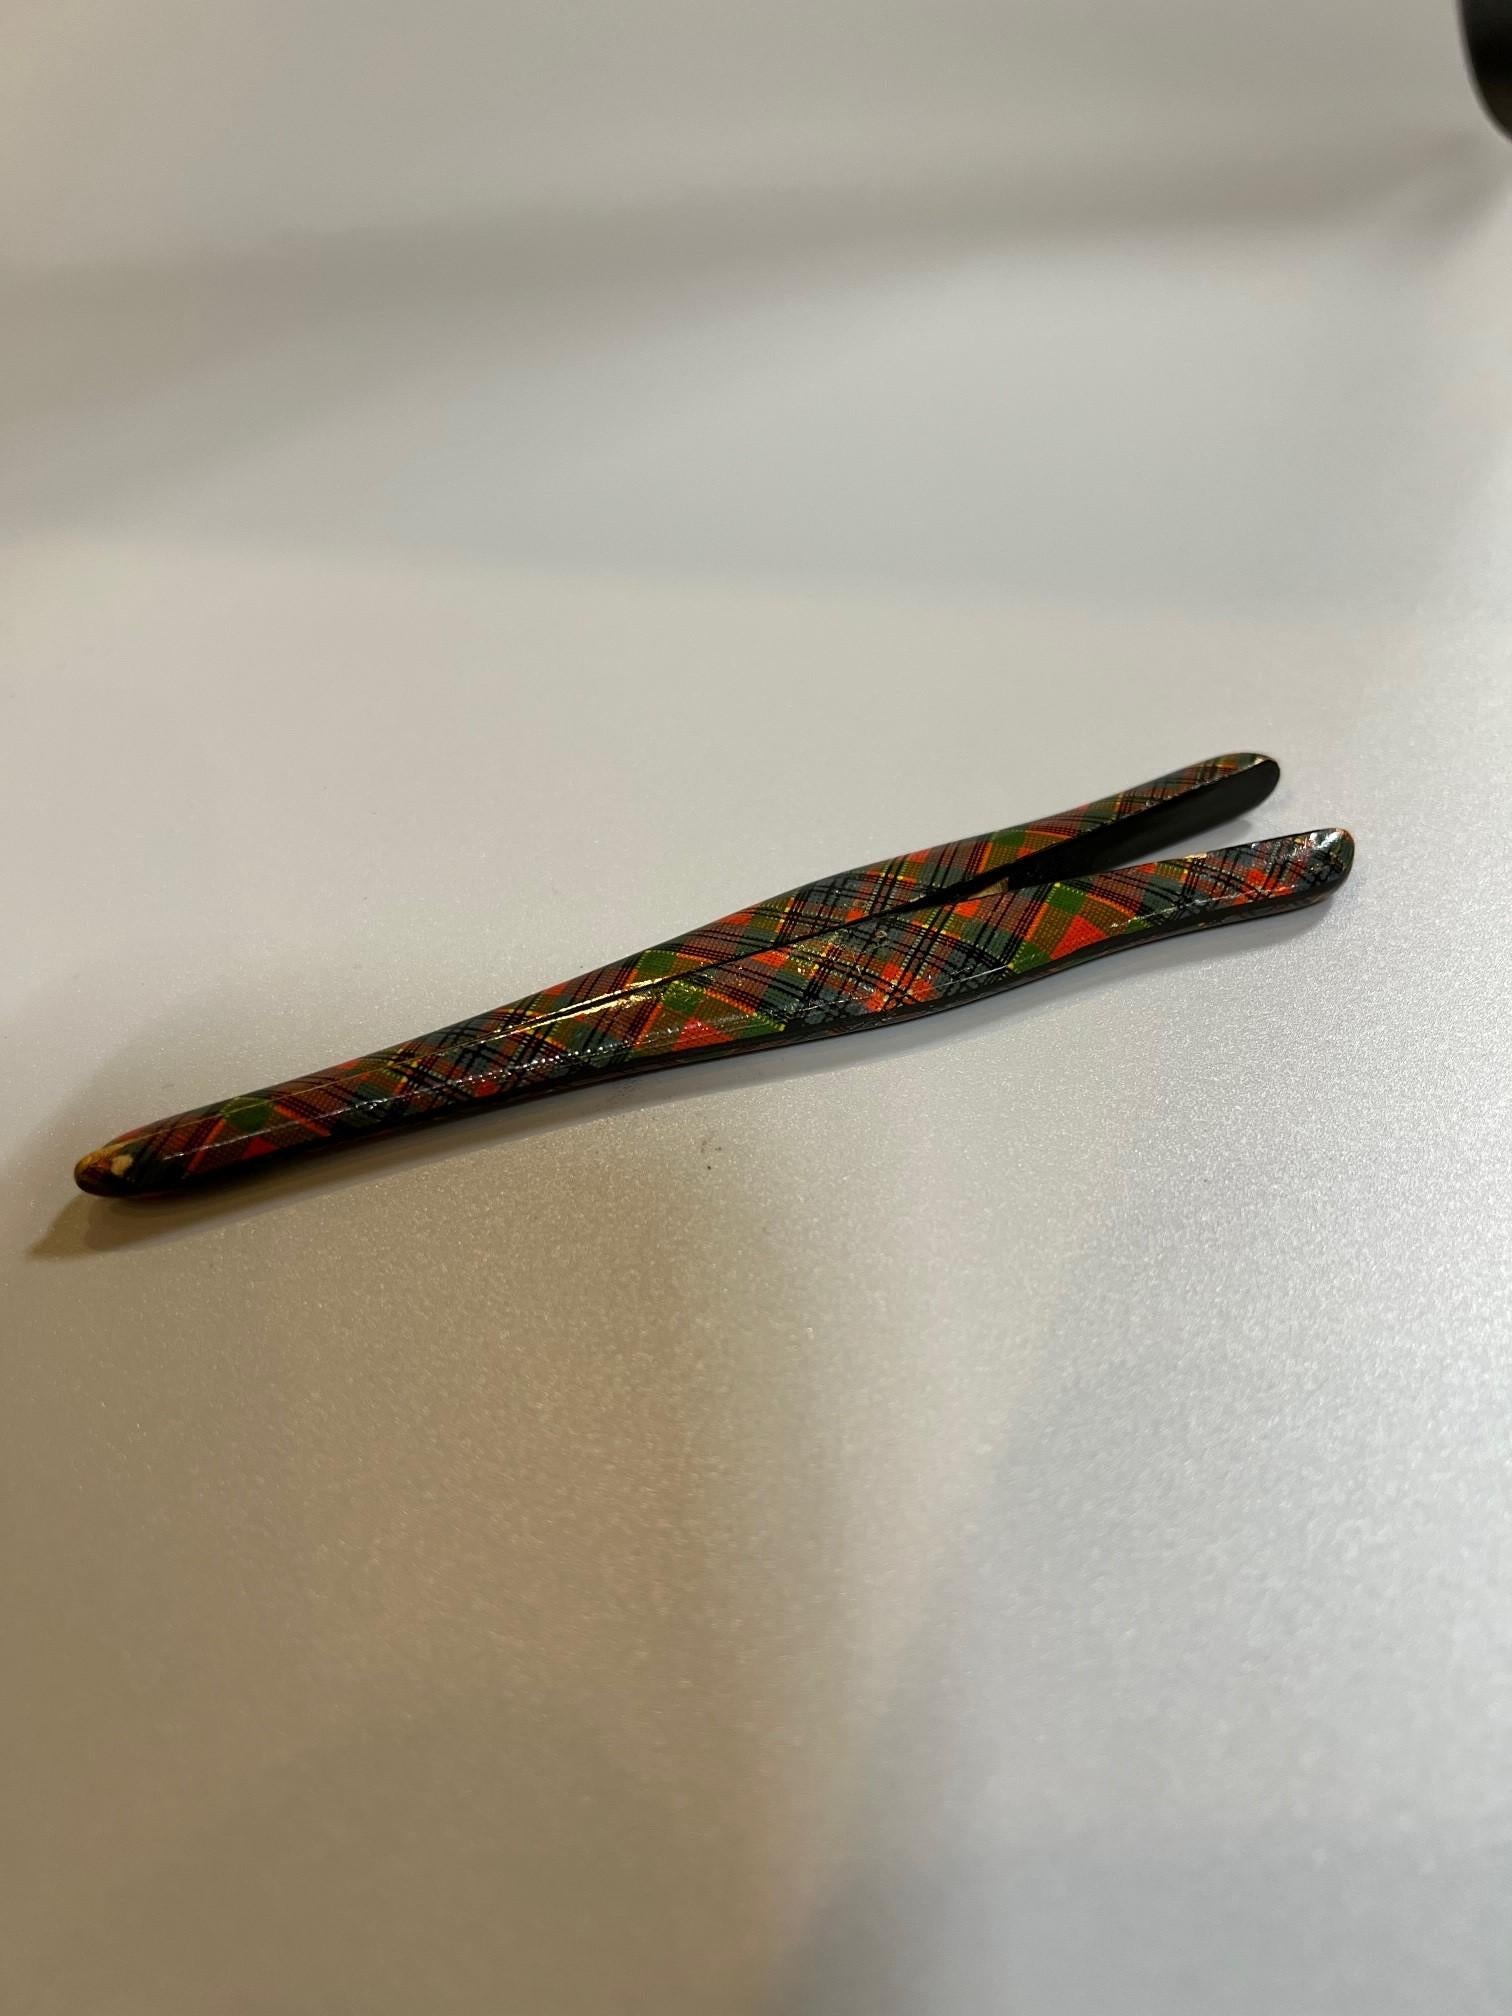 Early 19th century Scottish glove stretcher with a tartan McPherson colors. Tartan also called plaid which refers to Scottish clan colors. This is a rare piece from a private collector who traveled the world buying unusual and hard to find pieces.